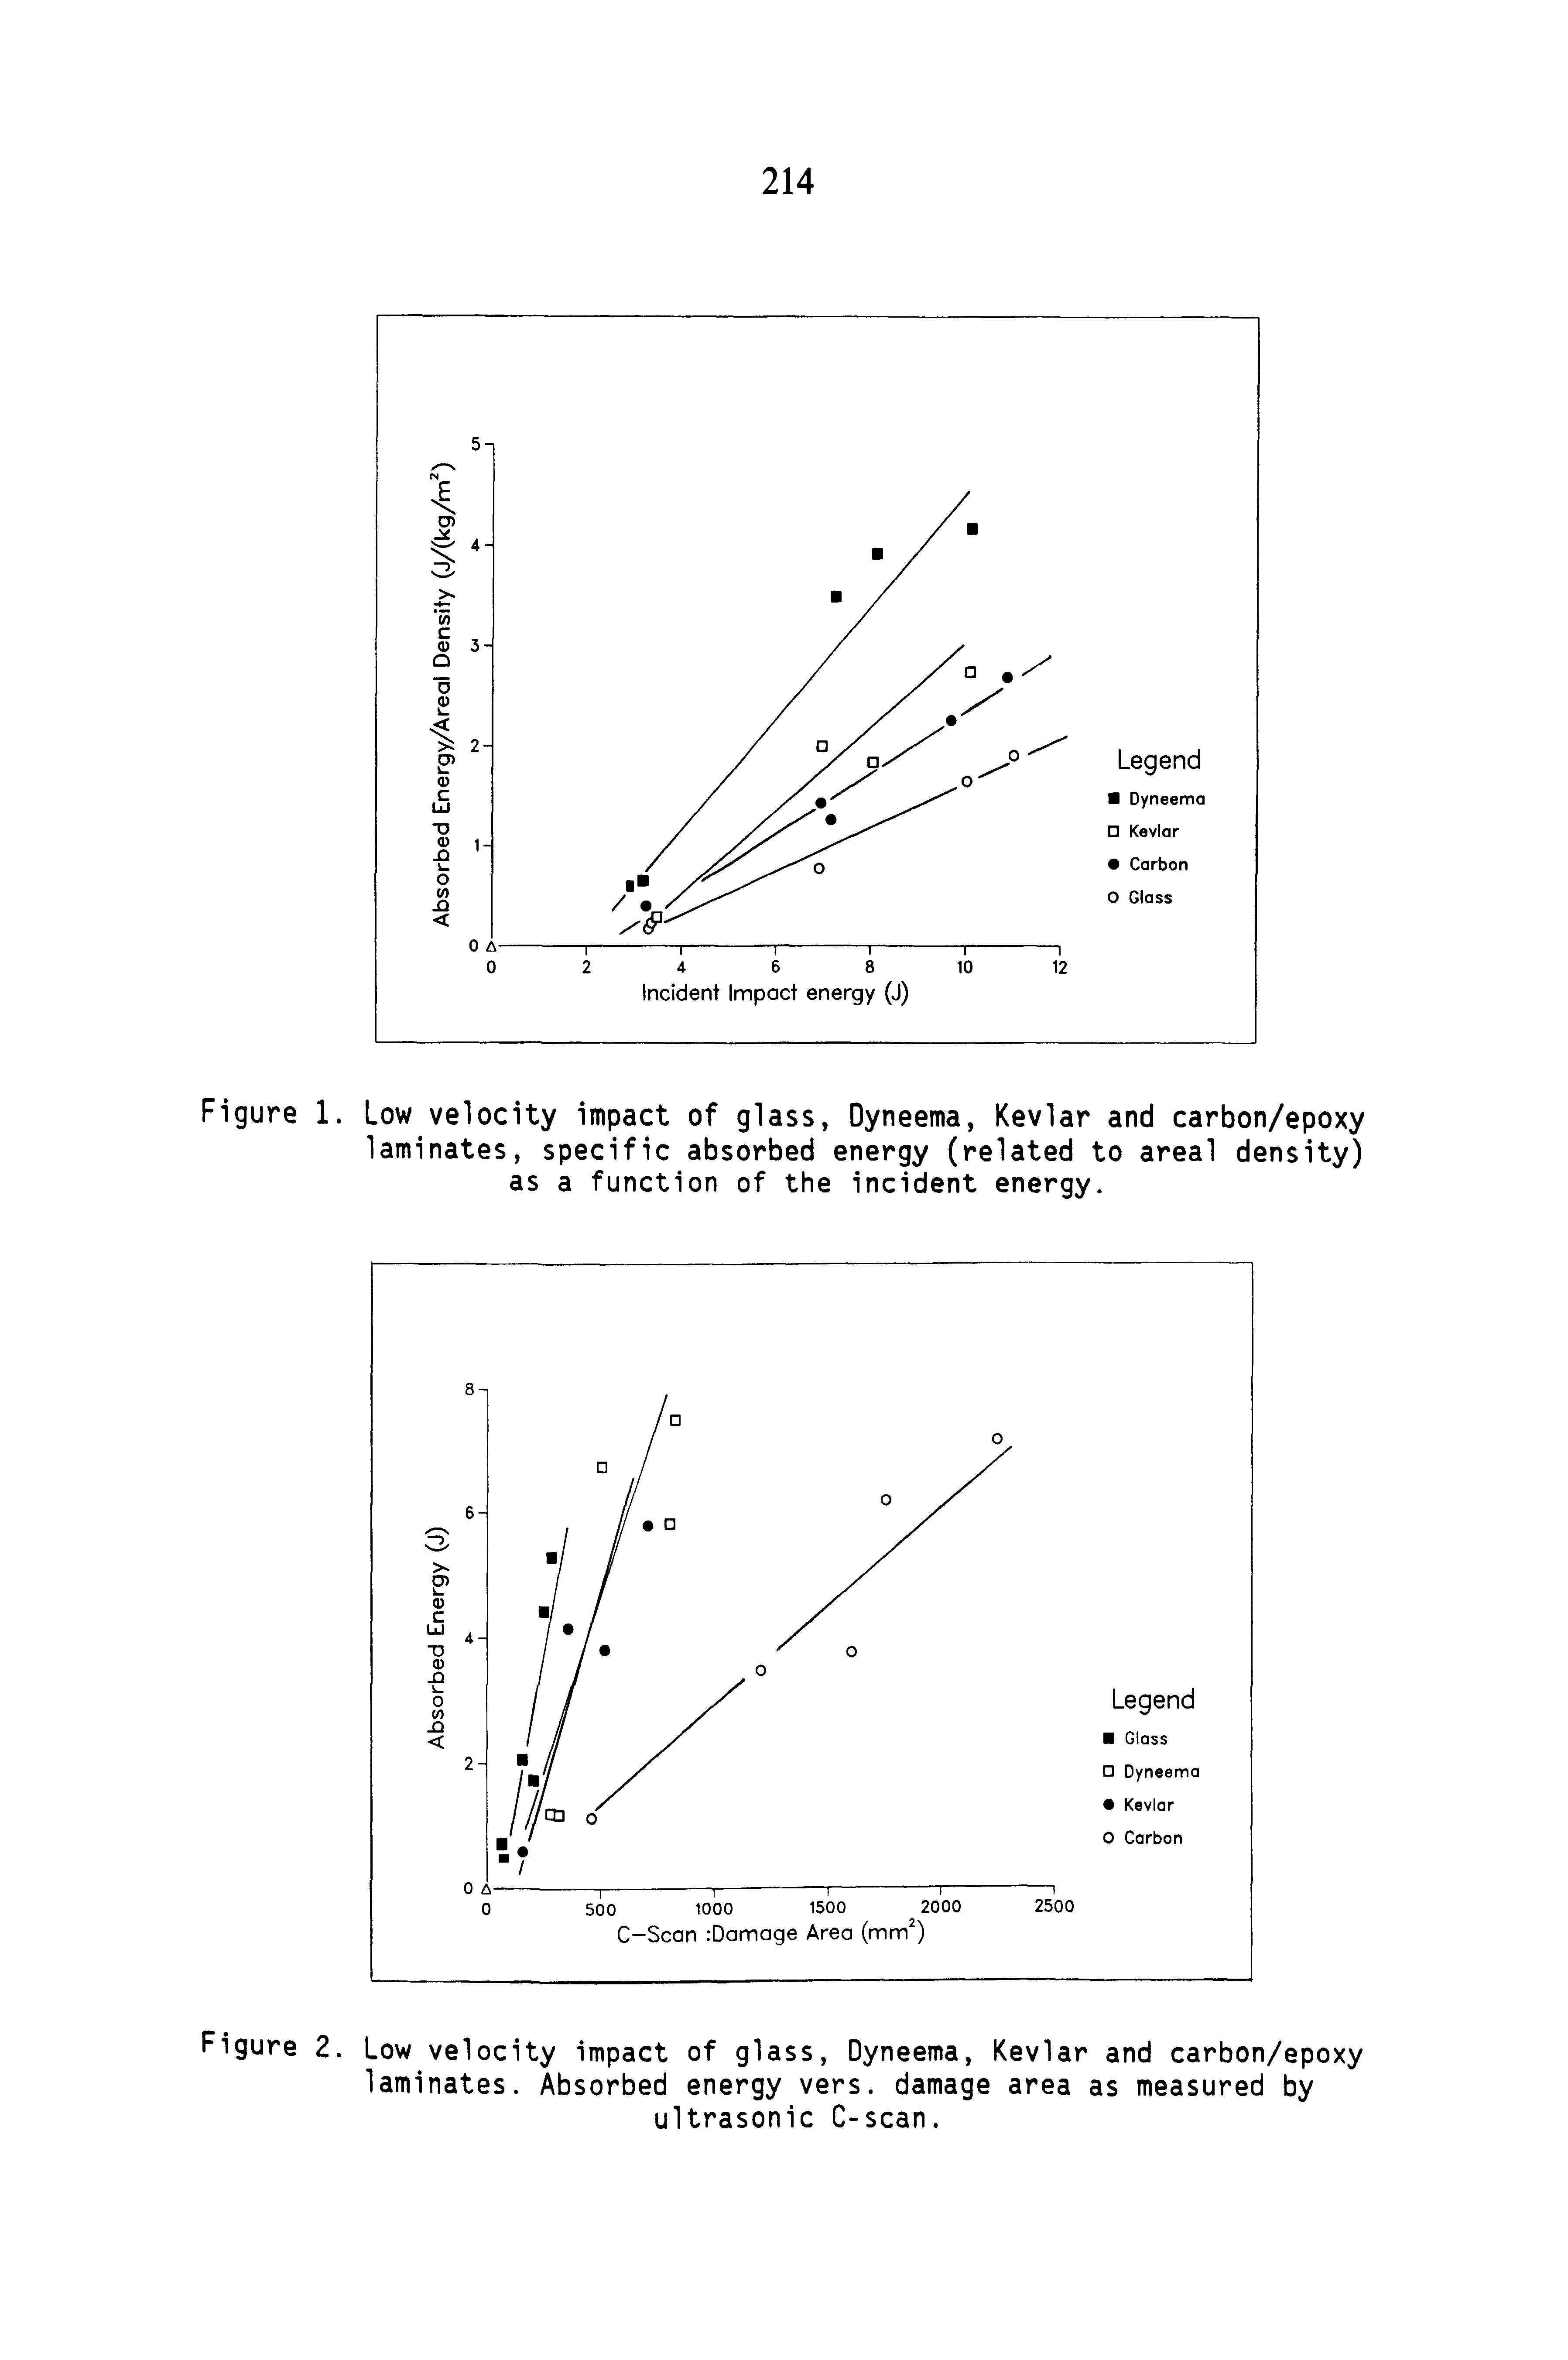 Figure 1. Low velocity impact of glass, Dyneema, Kevlar and carbon/epoxy laminates, specific absorbed energy (related to areal density) as a function of the incident energy.